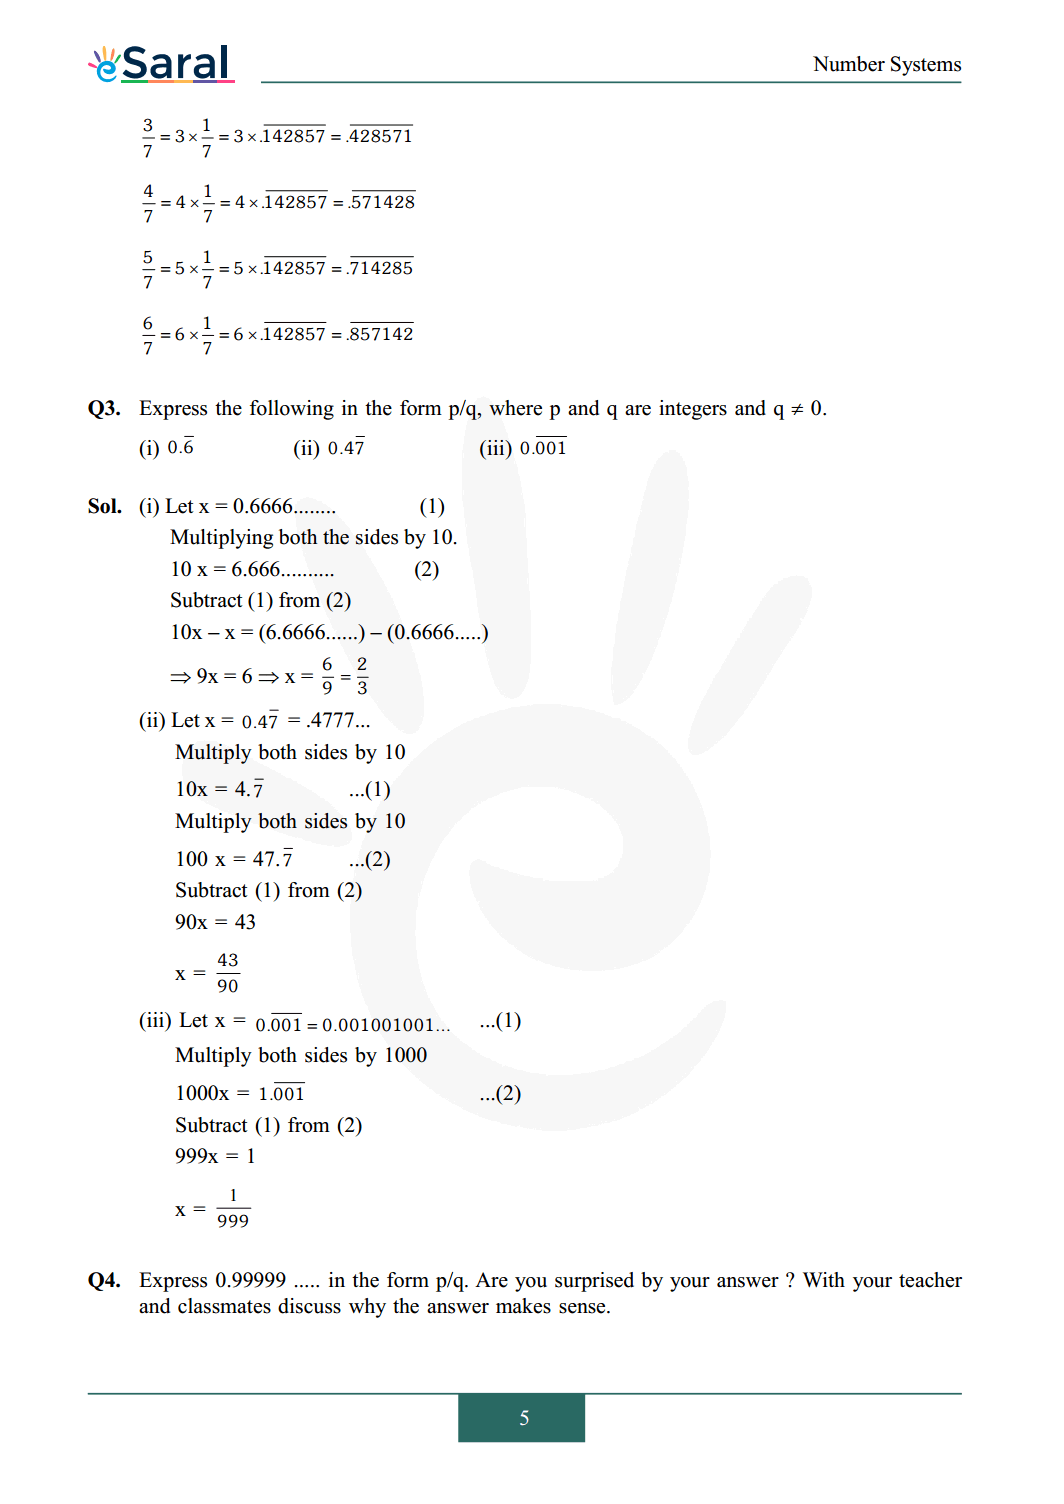 Class 9 maths chapter 1 exercise 1.3 solutions Image 2